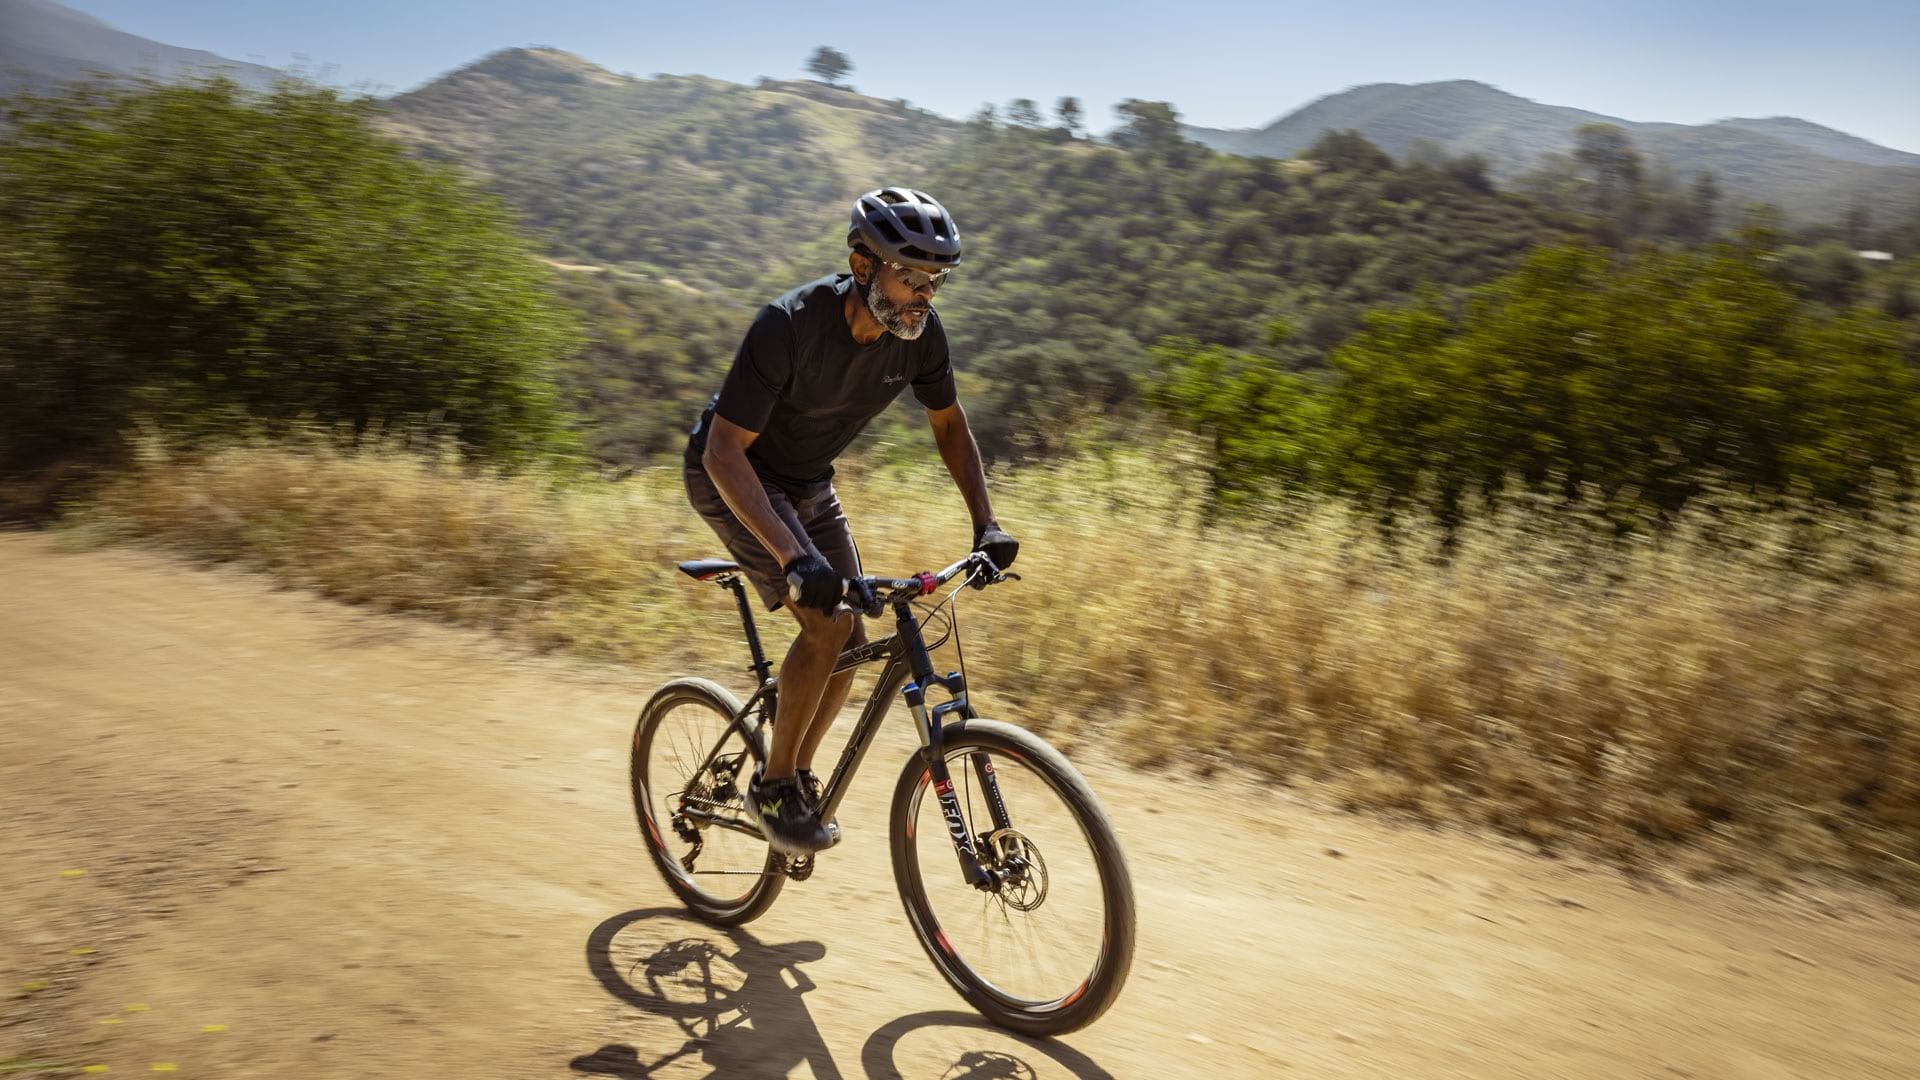 lifestyle image of a man on his bicycle riding through rolling hills